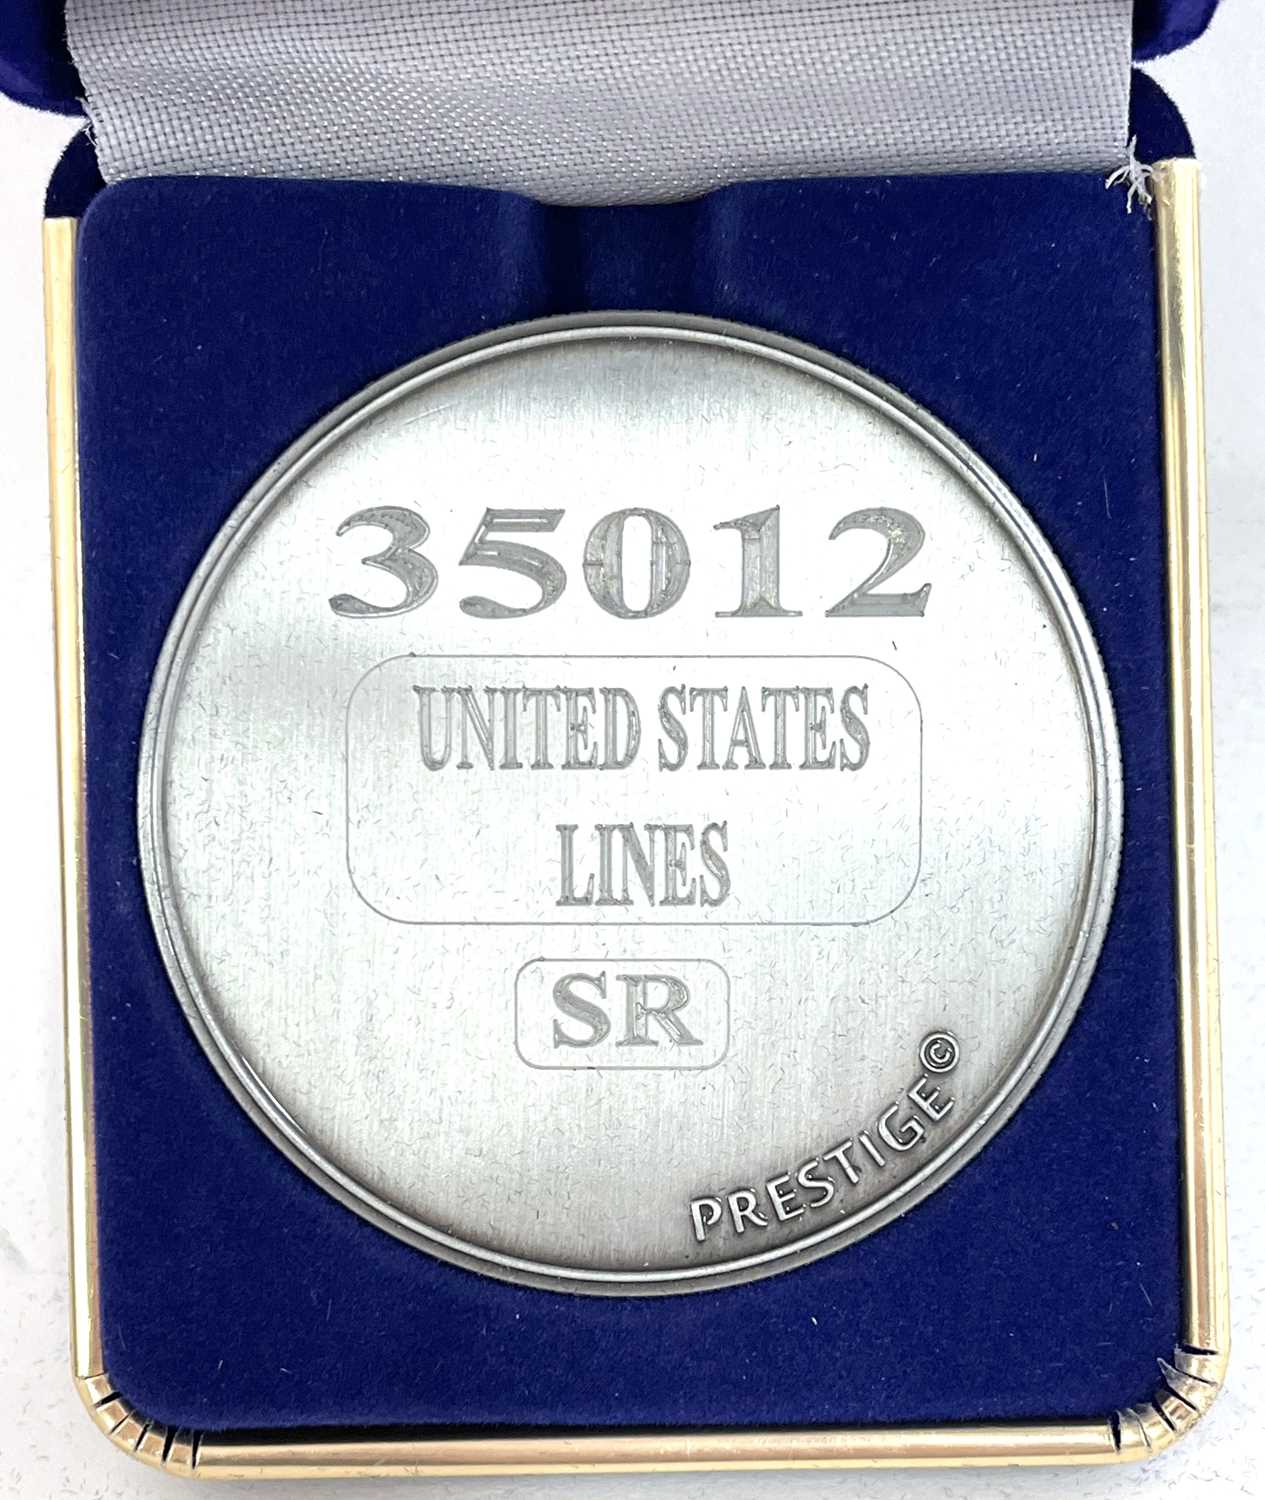 A commemorative silver award medallion to 35012 United States Lines SR